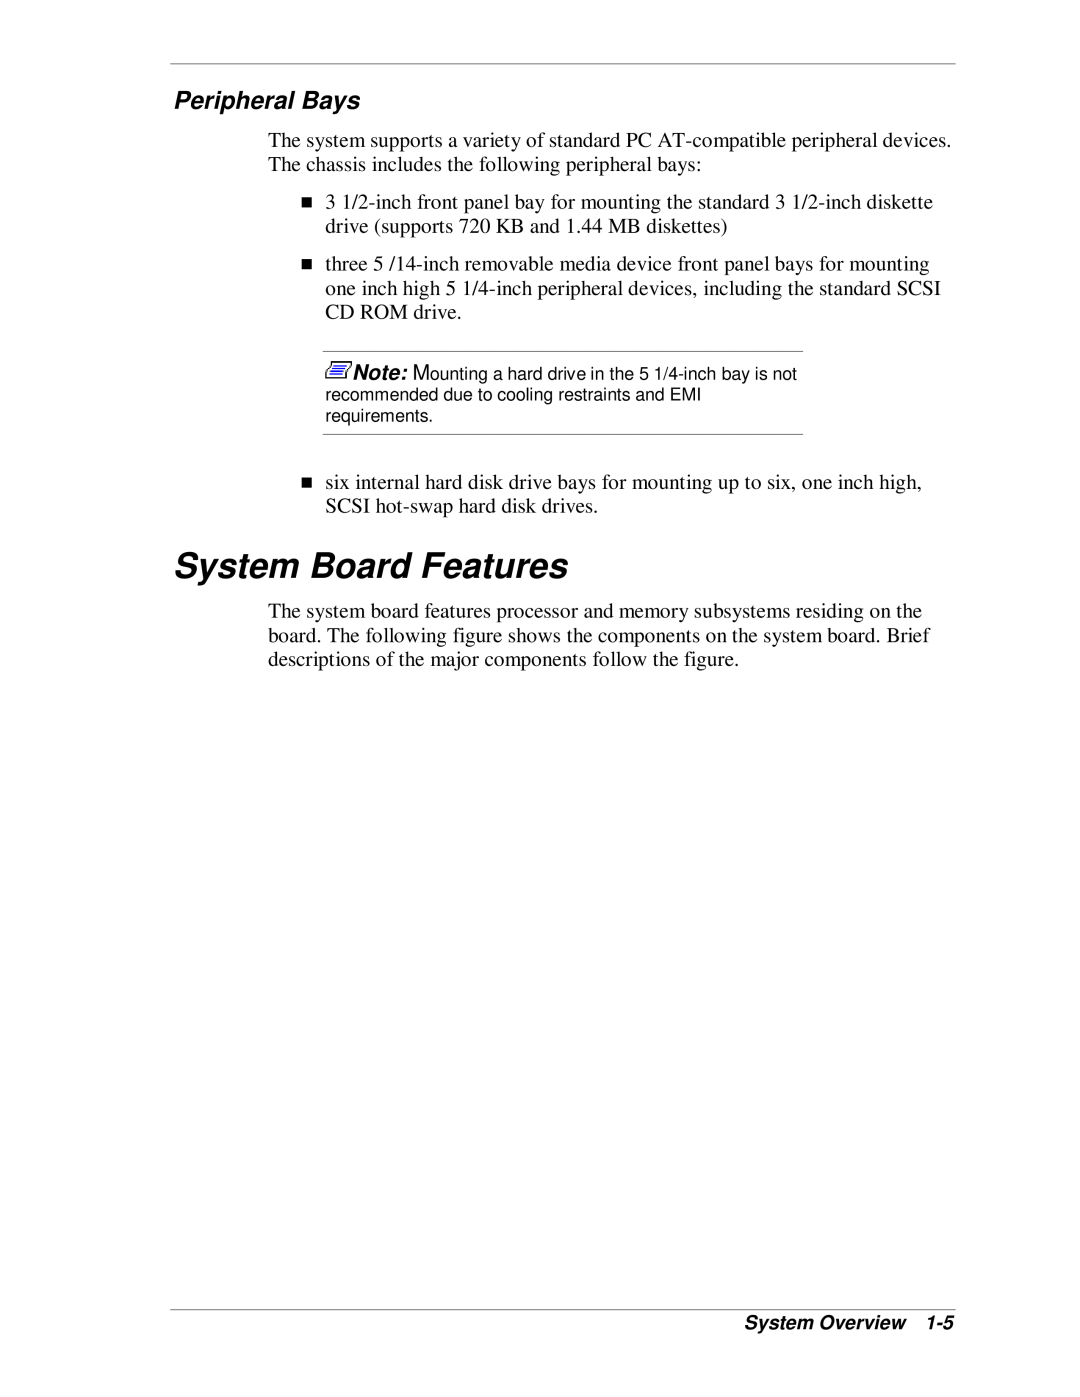 NEC MH4500 manual System Board Features, Peripheral Bays 